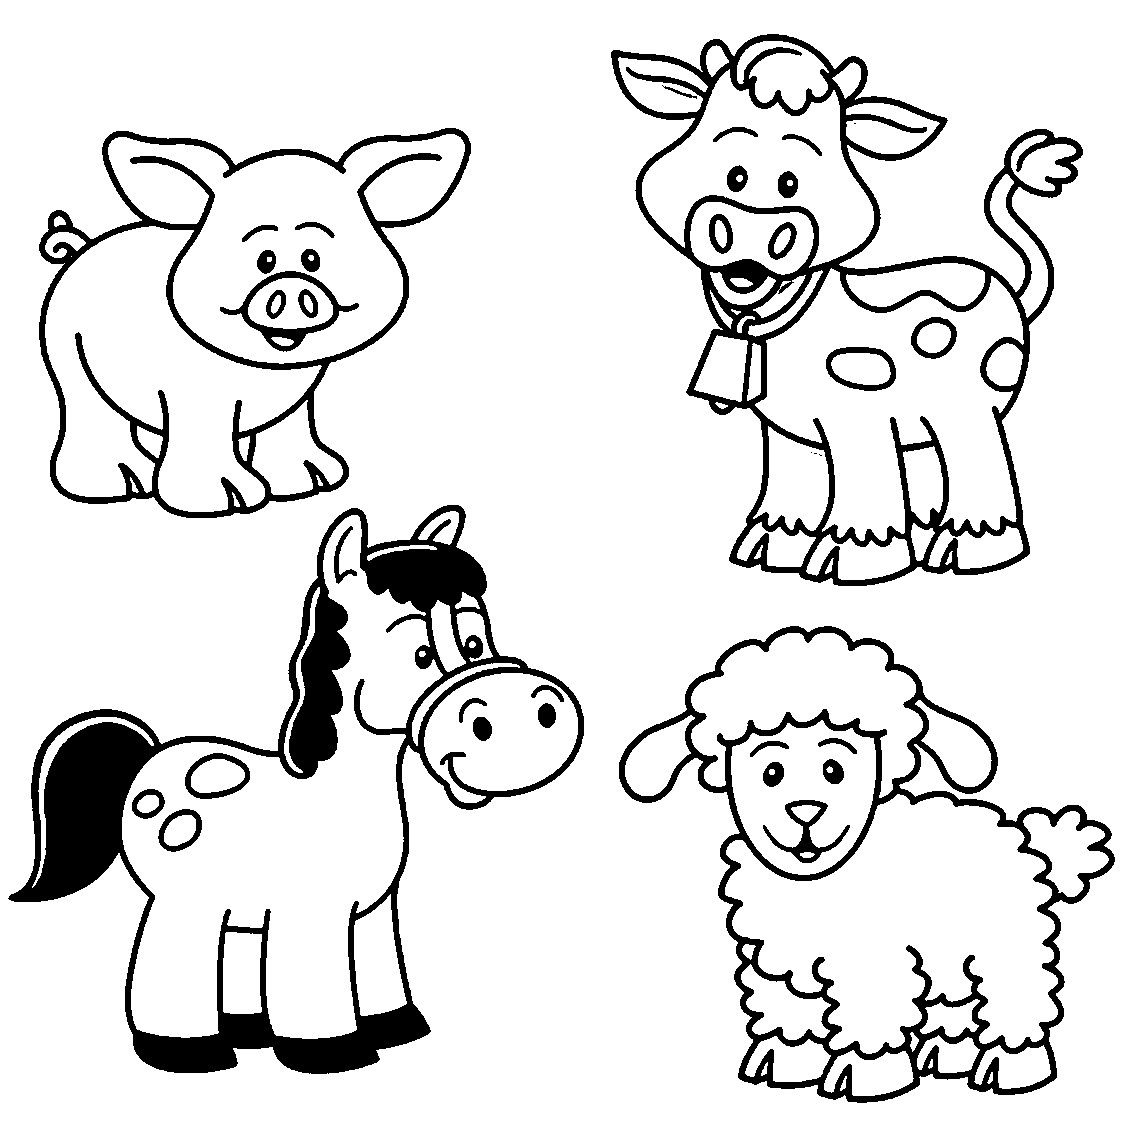 Farm Animal Coloring Pages For Toddlers
 Pin on Colorings